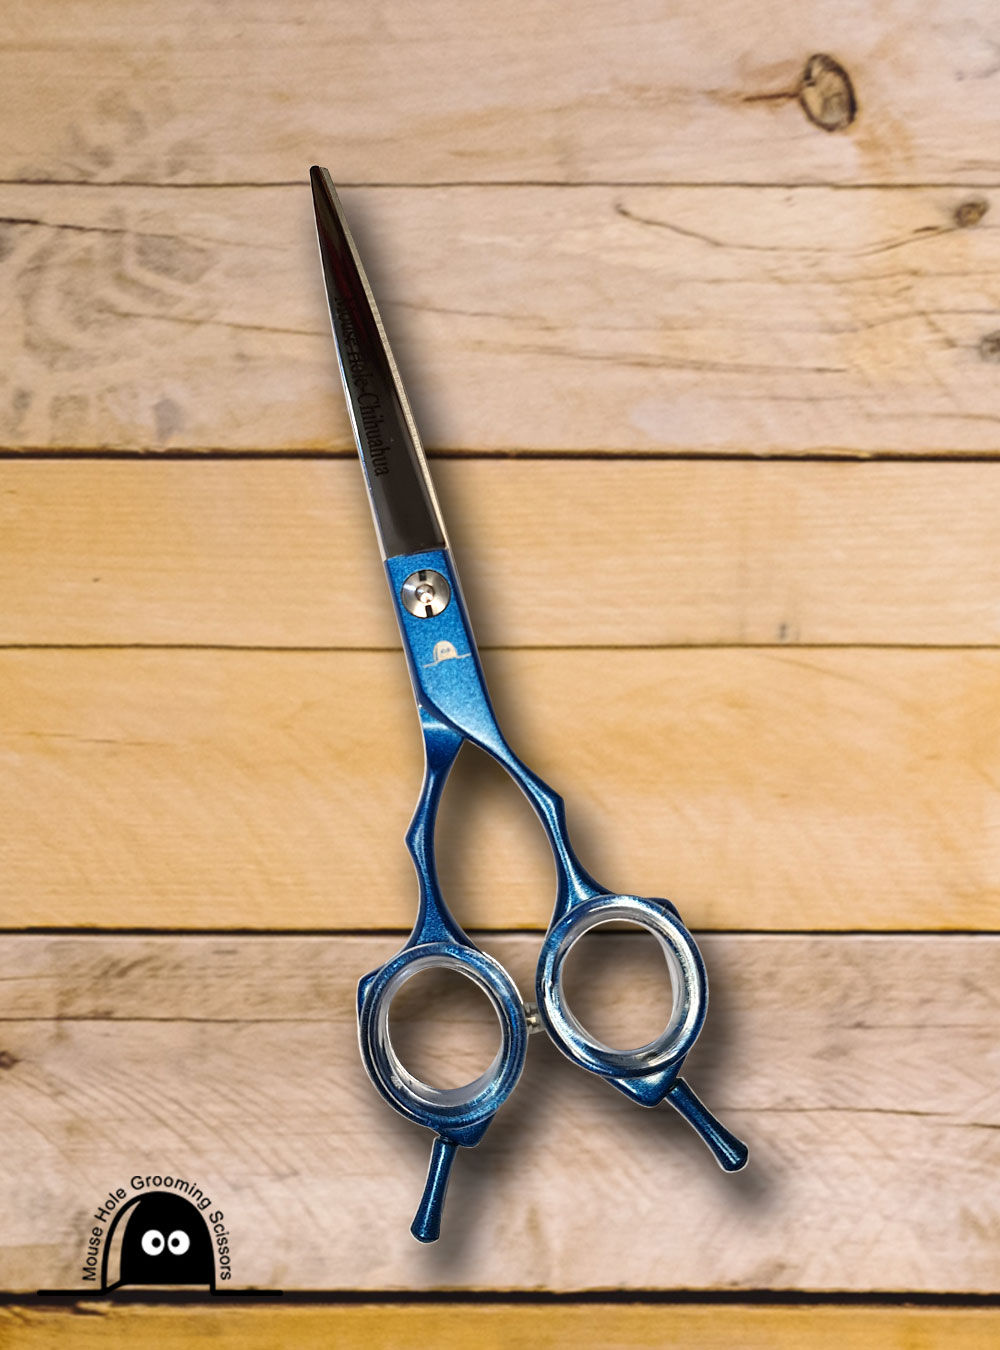 Chihuahua straight 6.5" and 7" Pet Grooming Scissors